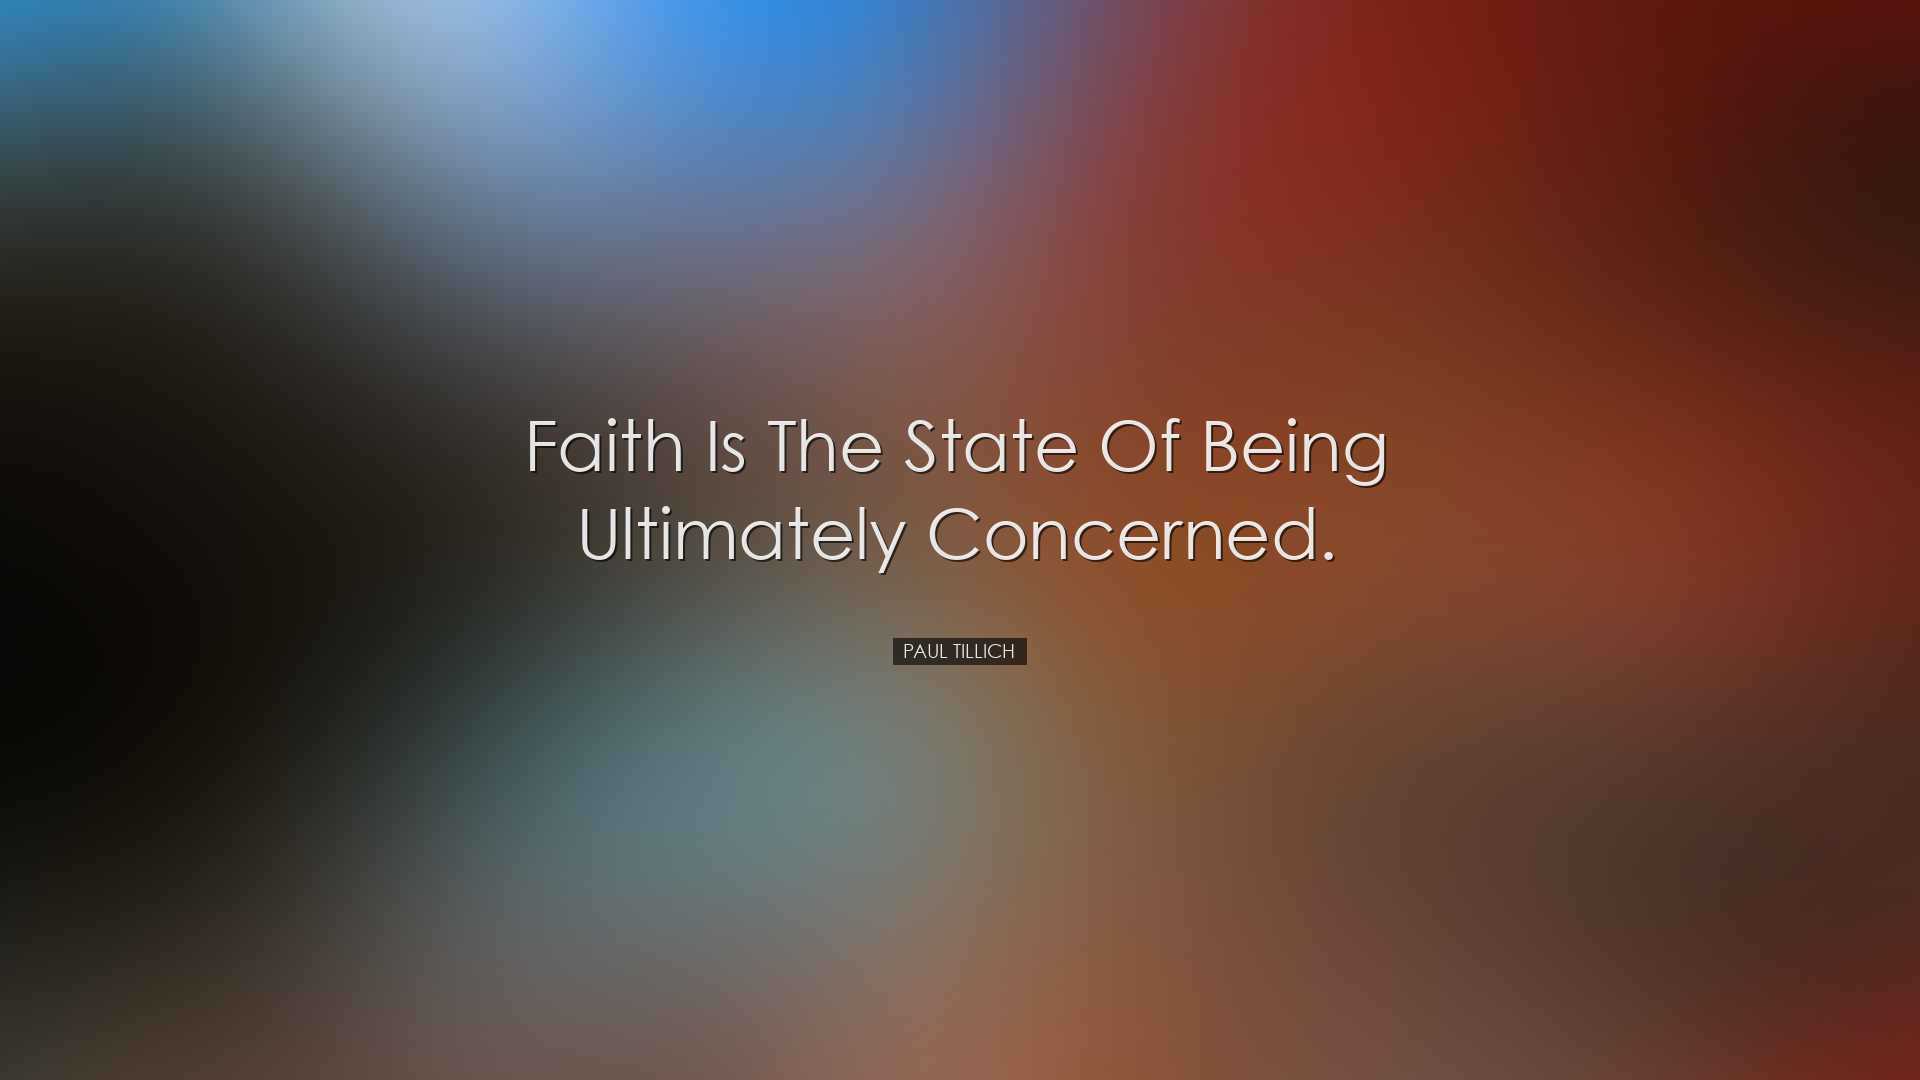 Faith is the state of being ultimately concerned. - Paul Tillich